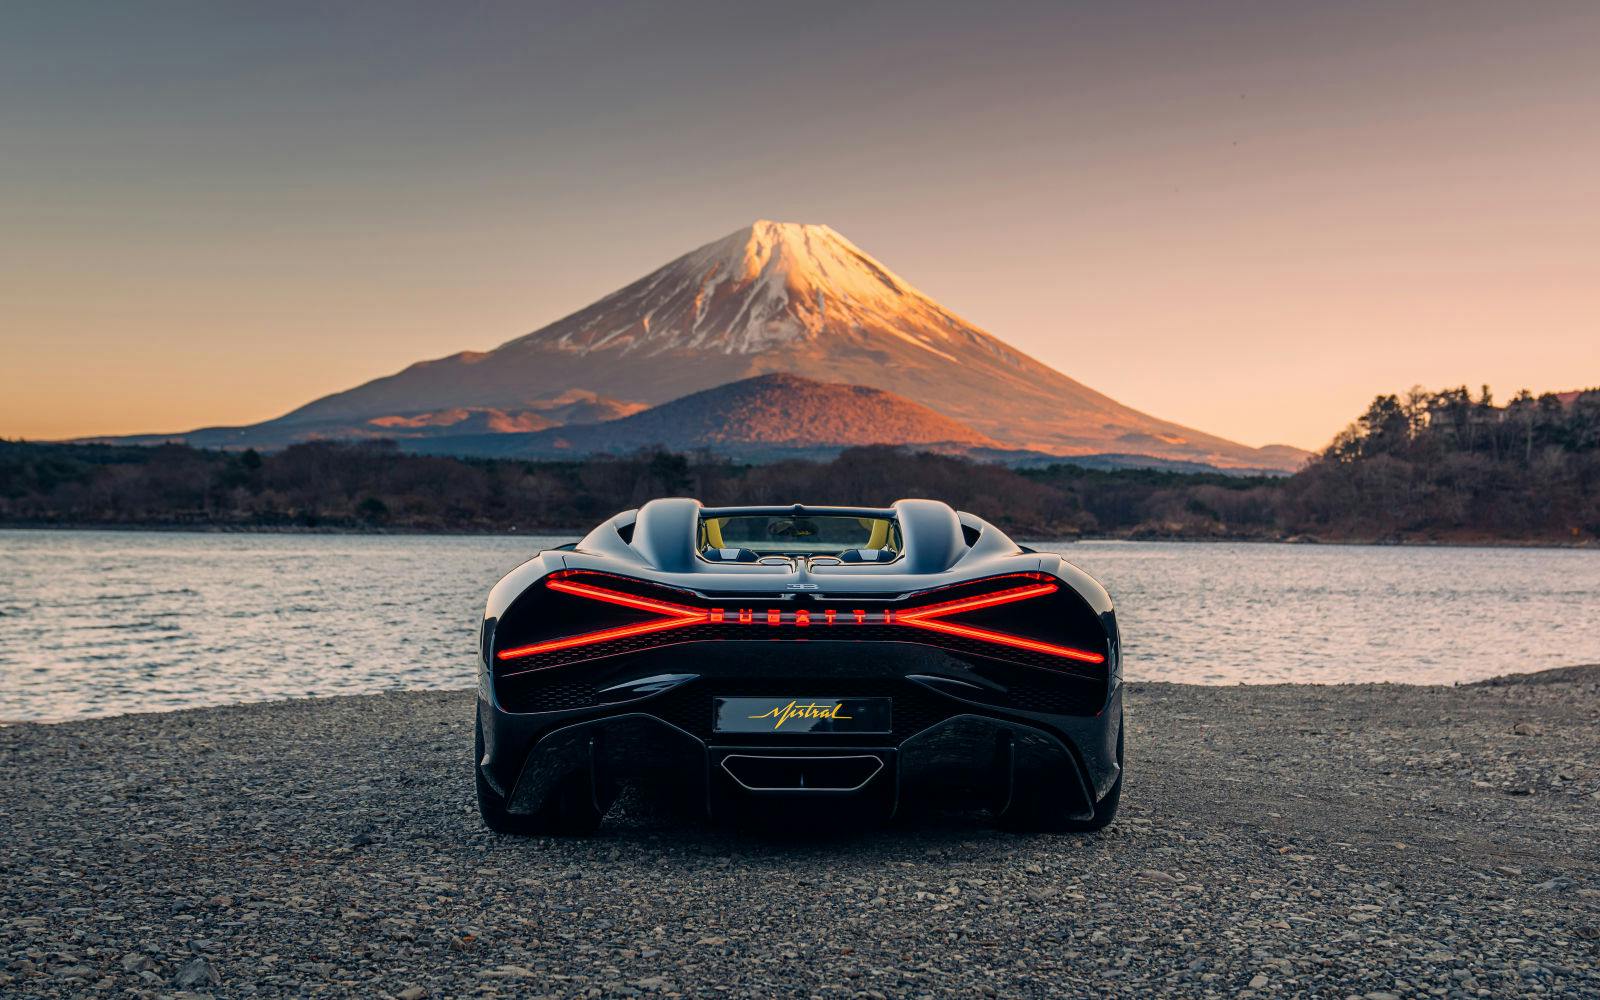 The X-shaped rear light of the W16 Mistral in front of the legendary Mount Fuji.